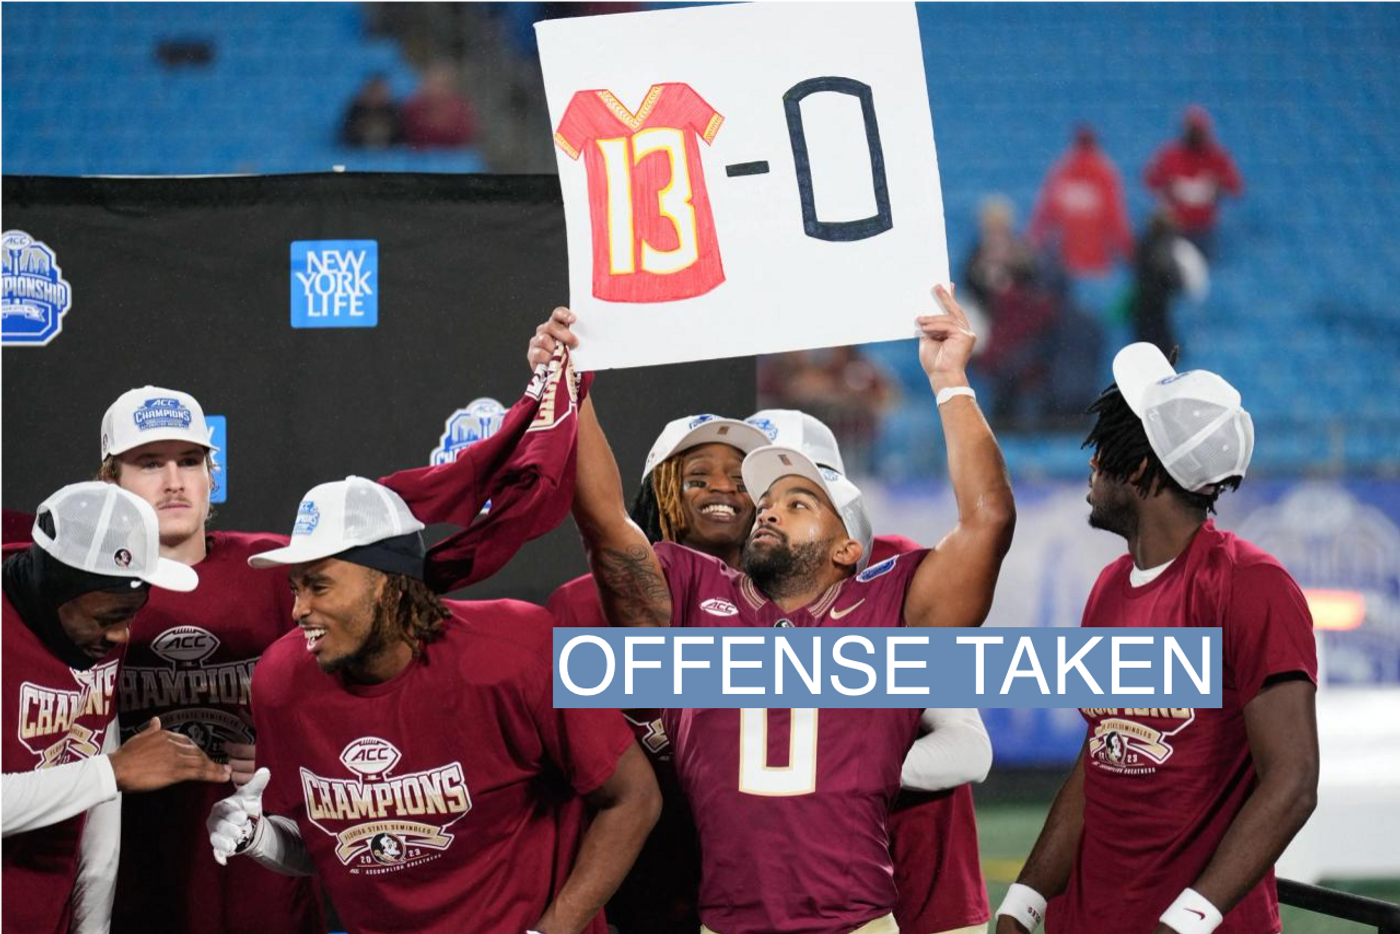 Florida State Seminoles wide receiver Ja'Khi Douglas (0) holds up a sign during the ACC Championship trophy presentation.